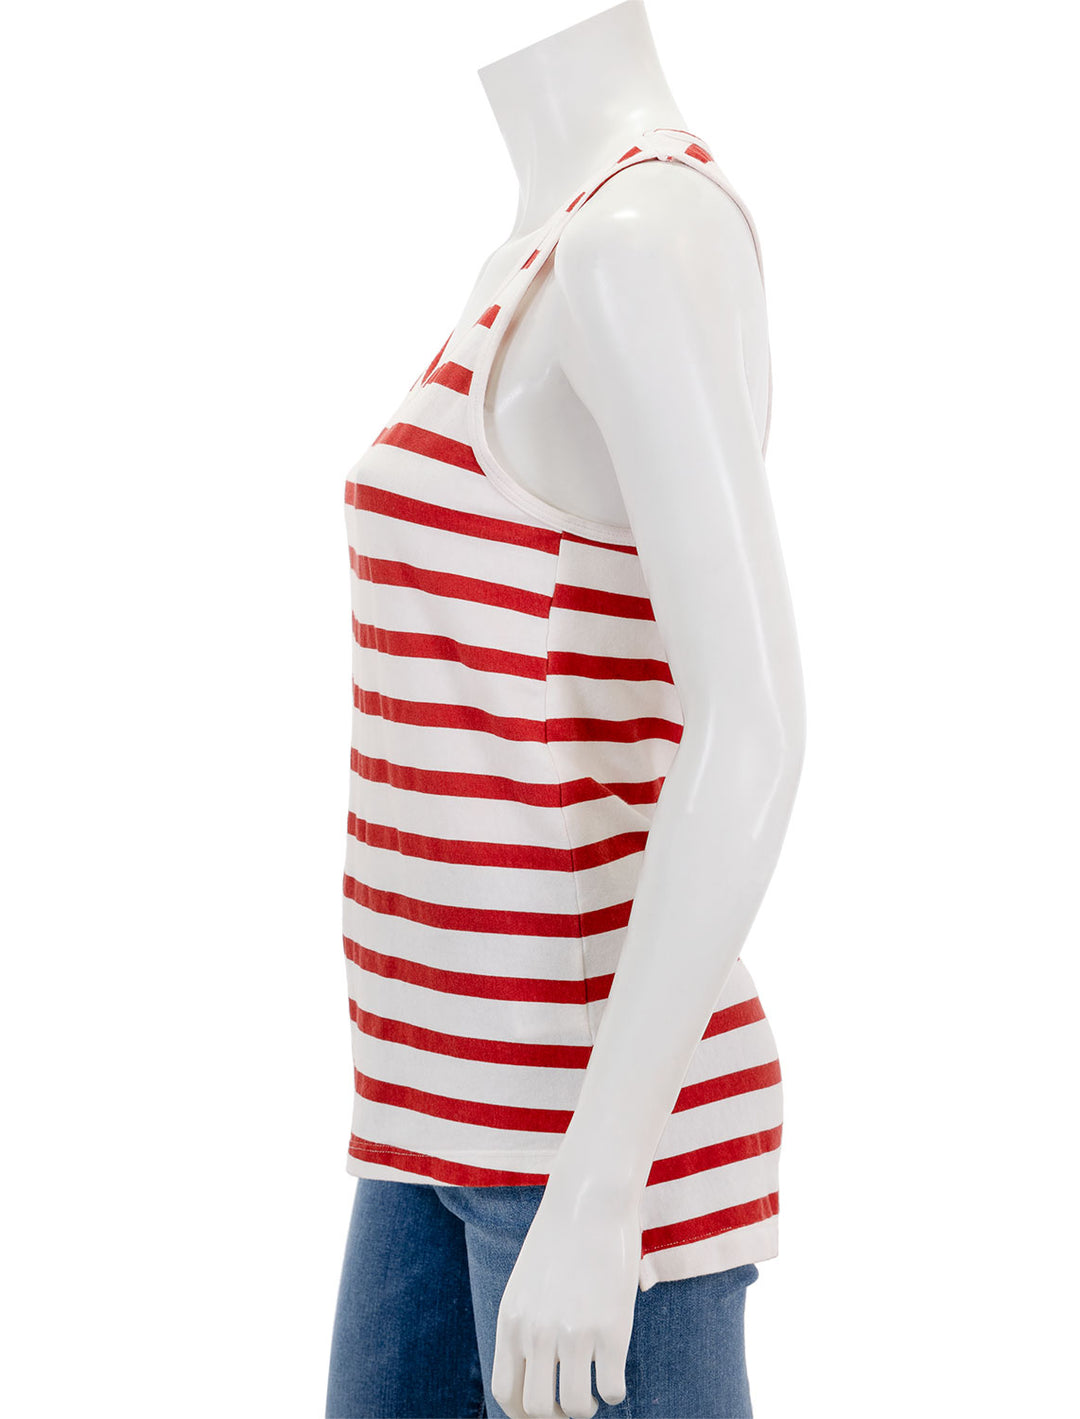 Side view of ASKK NY's printed tank in red and white stripe.